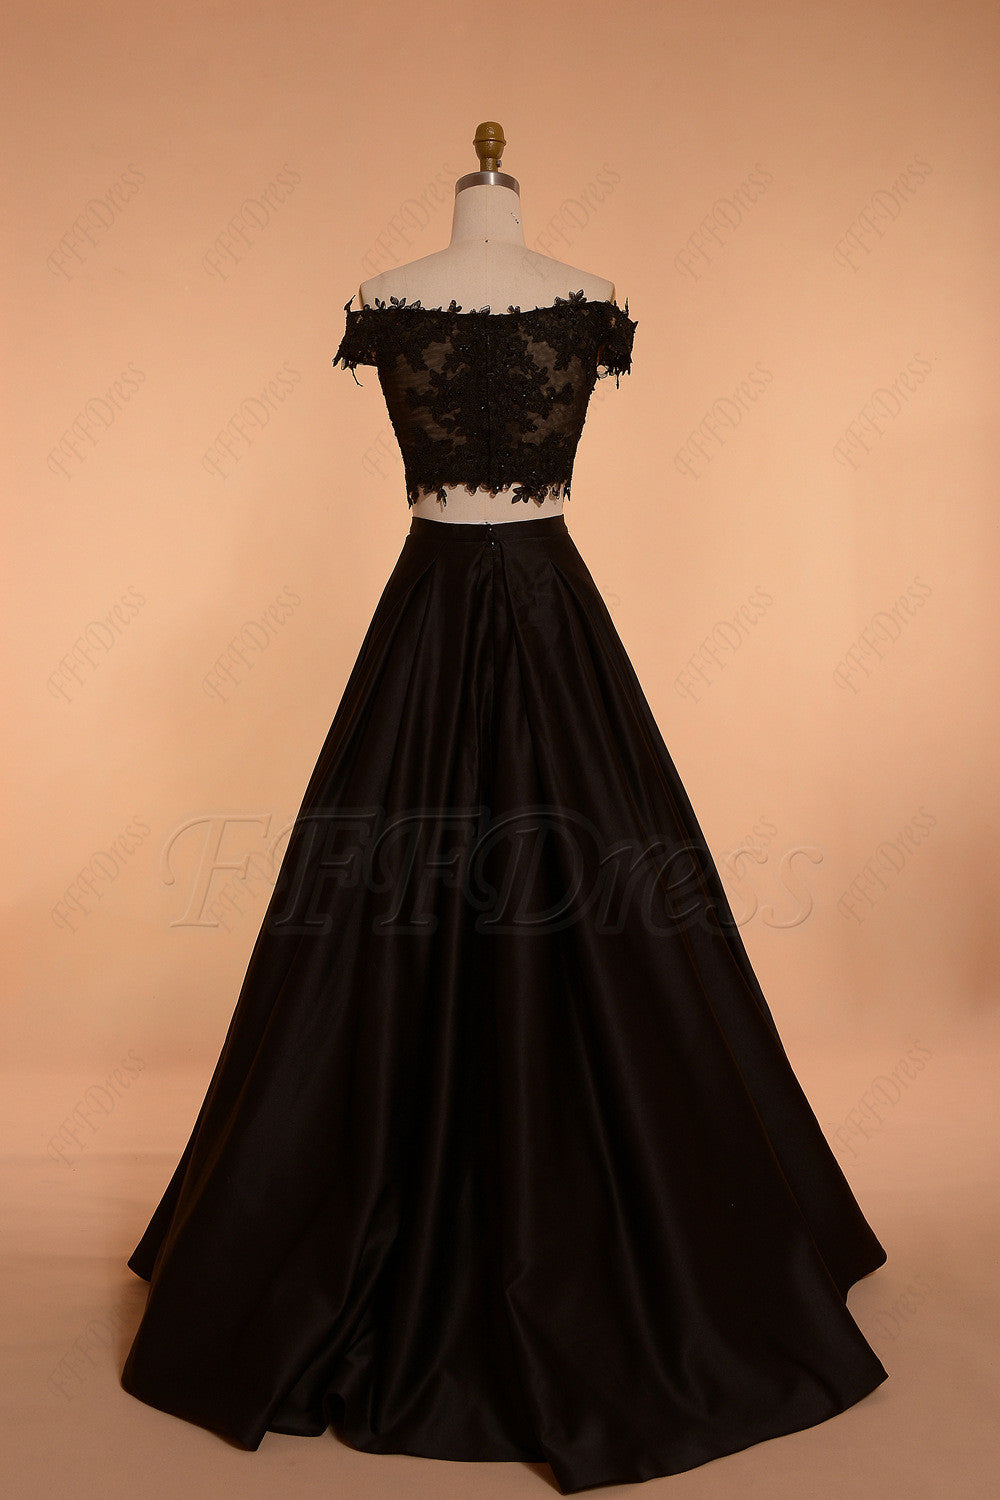 Off the shoulder Black Ball Gown Two Piece Prom Dress Long